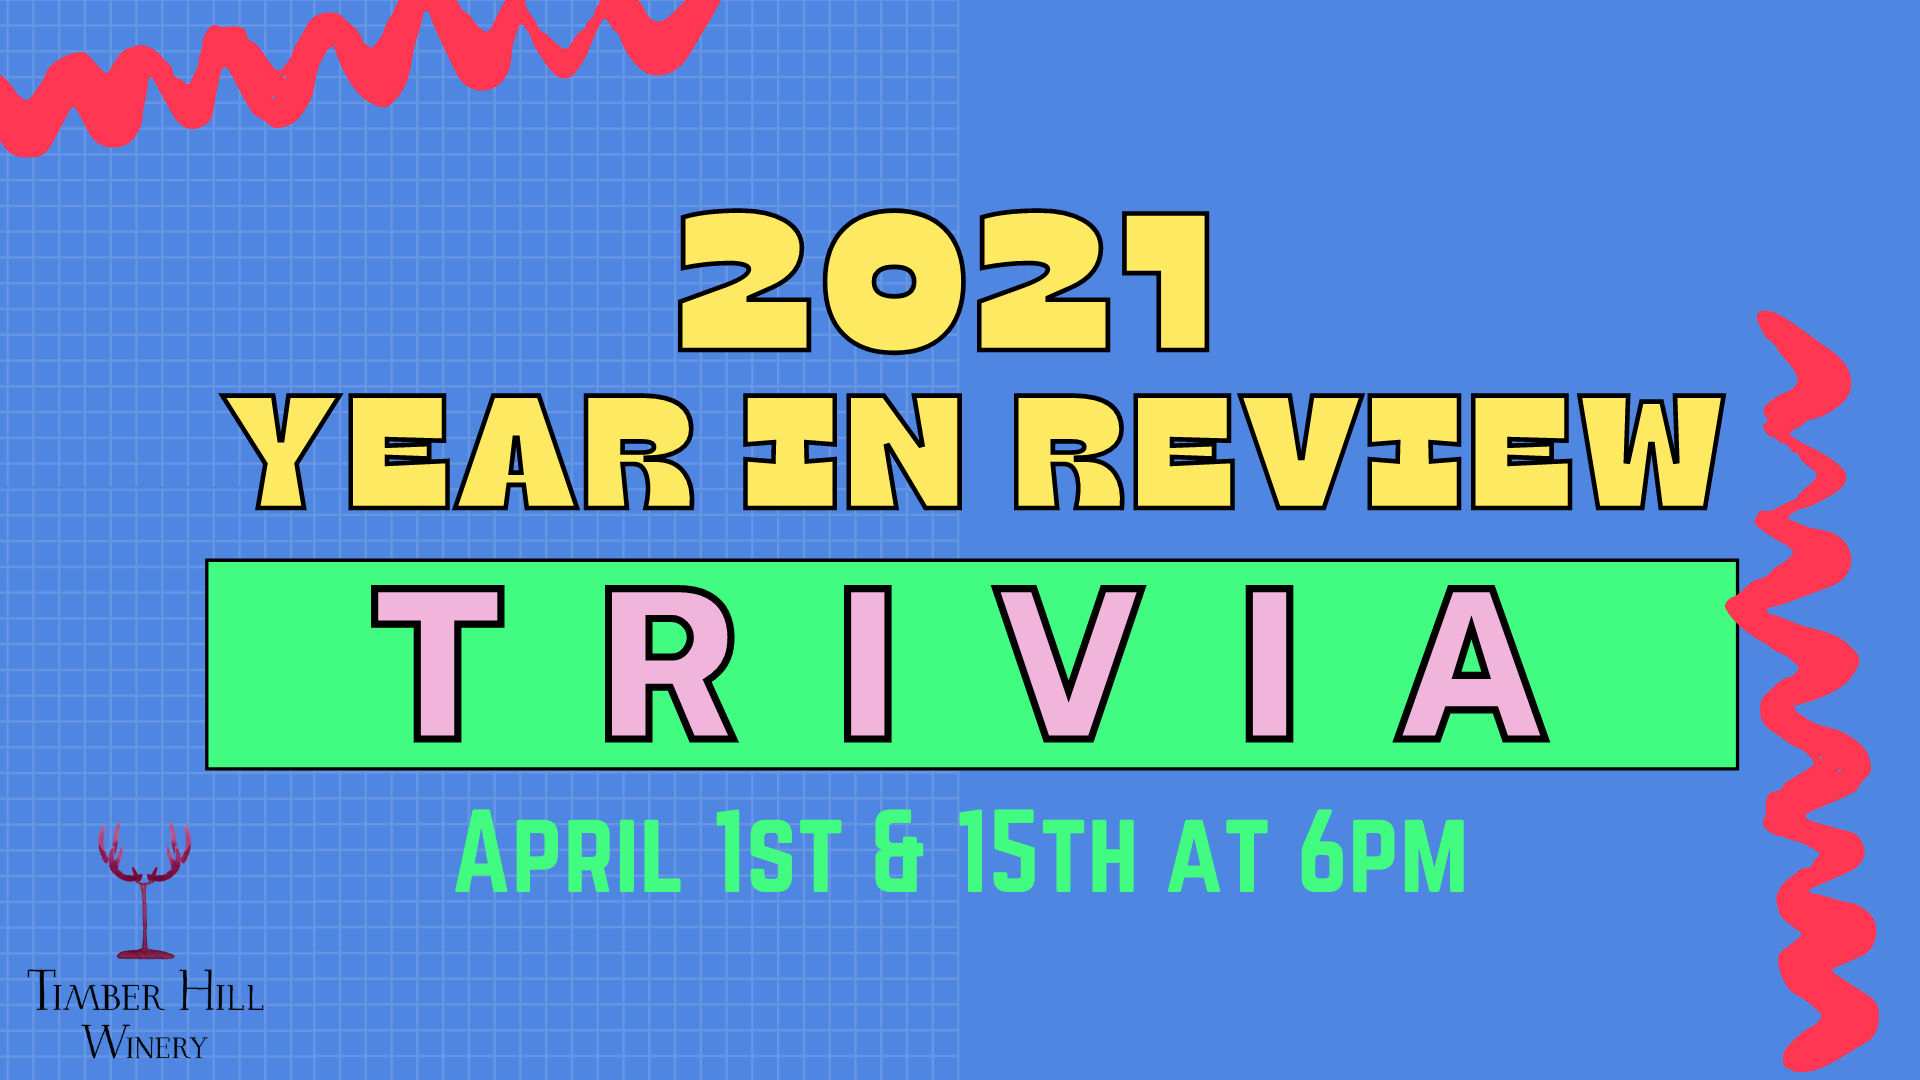 2021 Year in Review Trivia